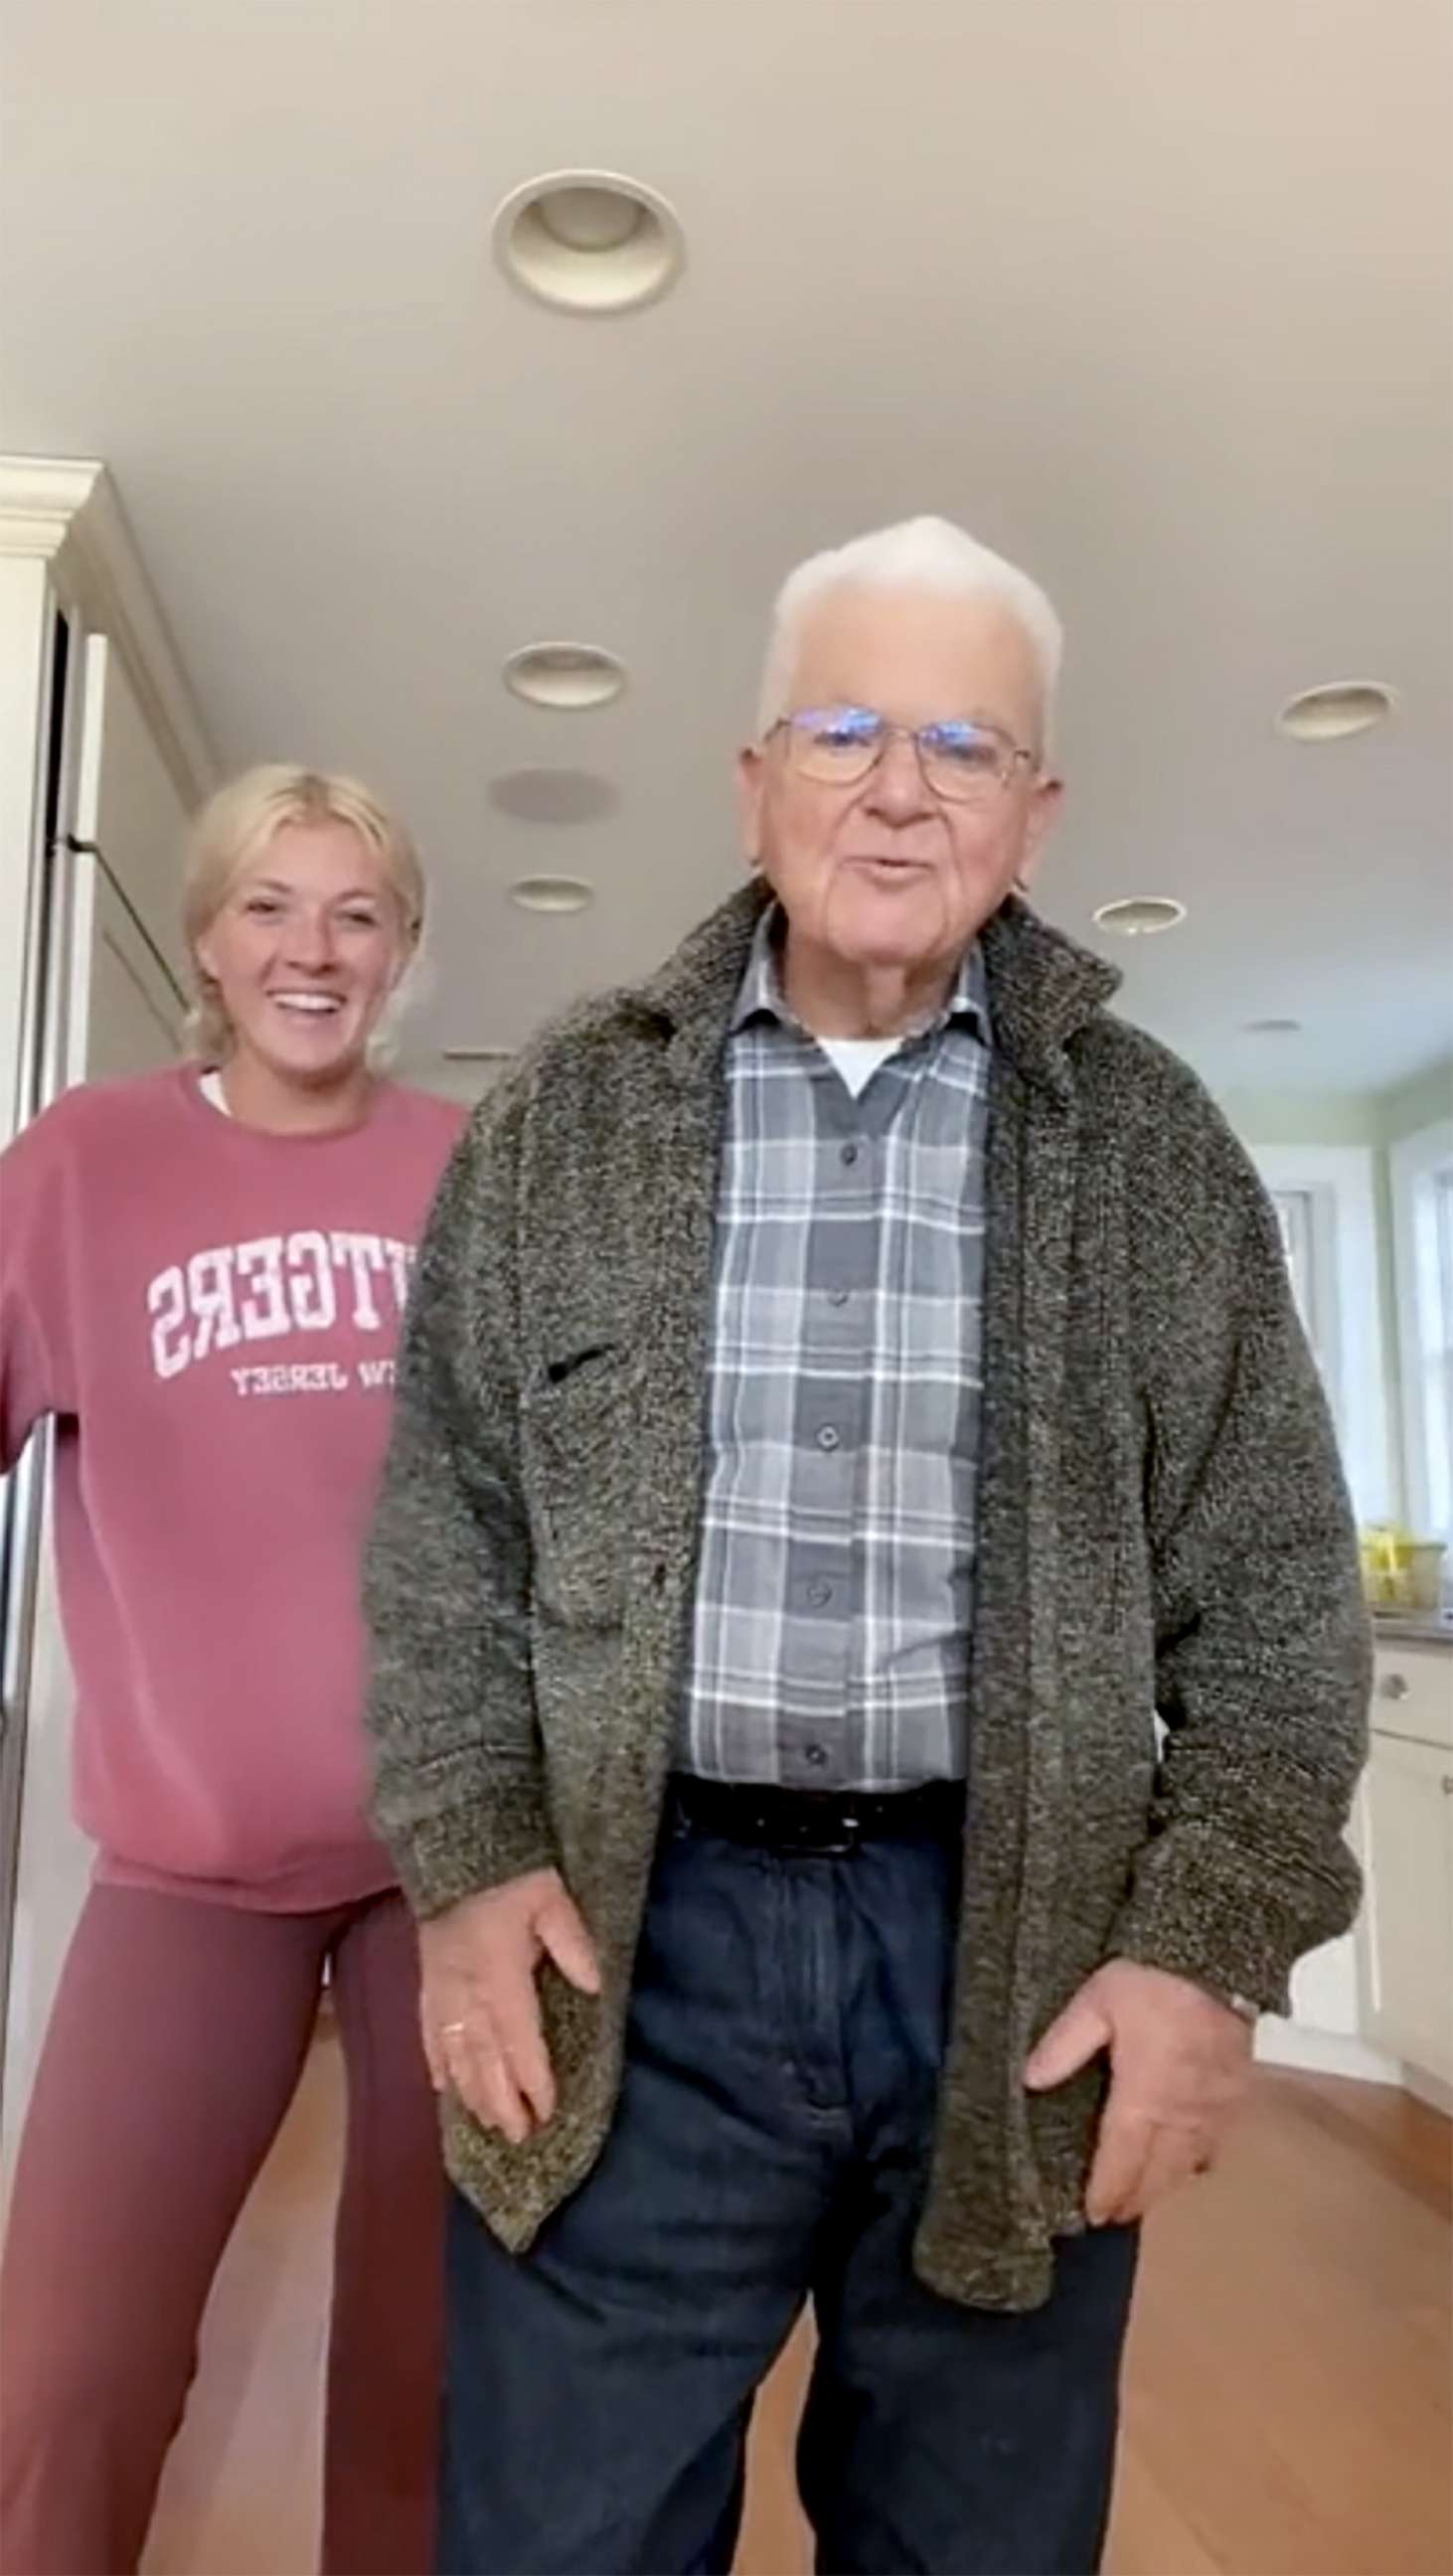 PHOTO: Grace Pettit and her grandfather Liam Ryan made a "fit check" TikTok video together.